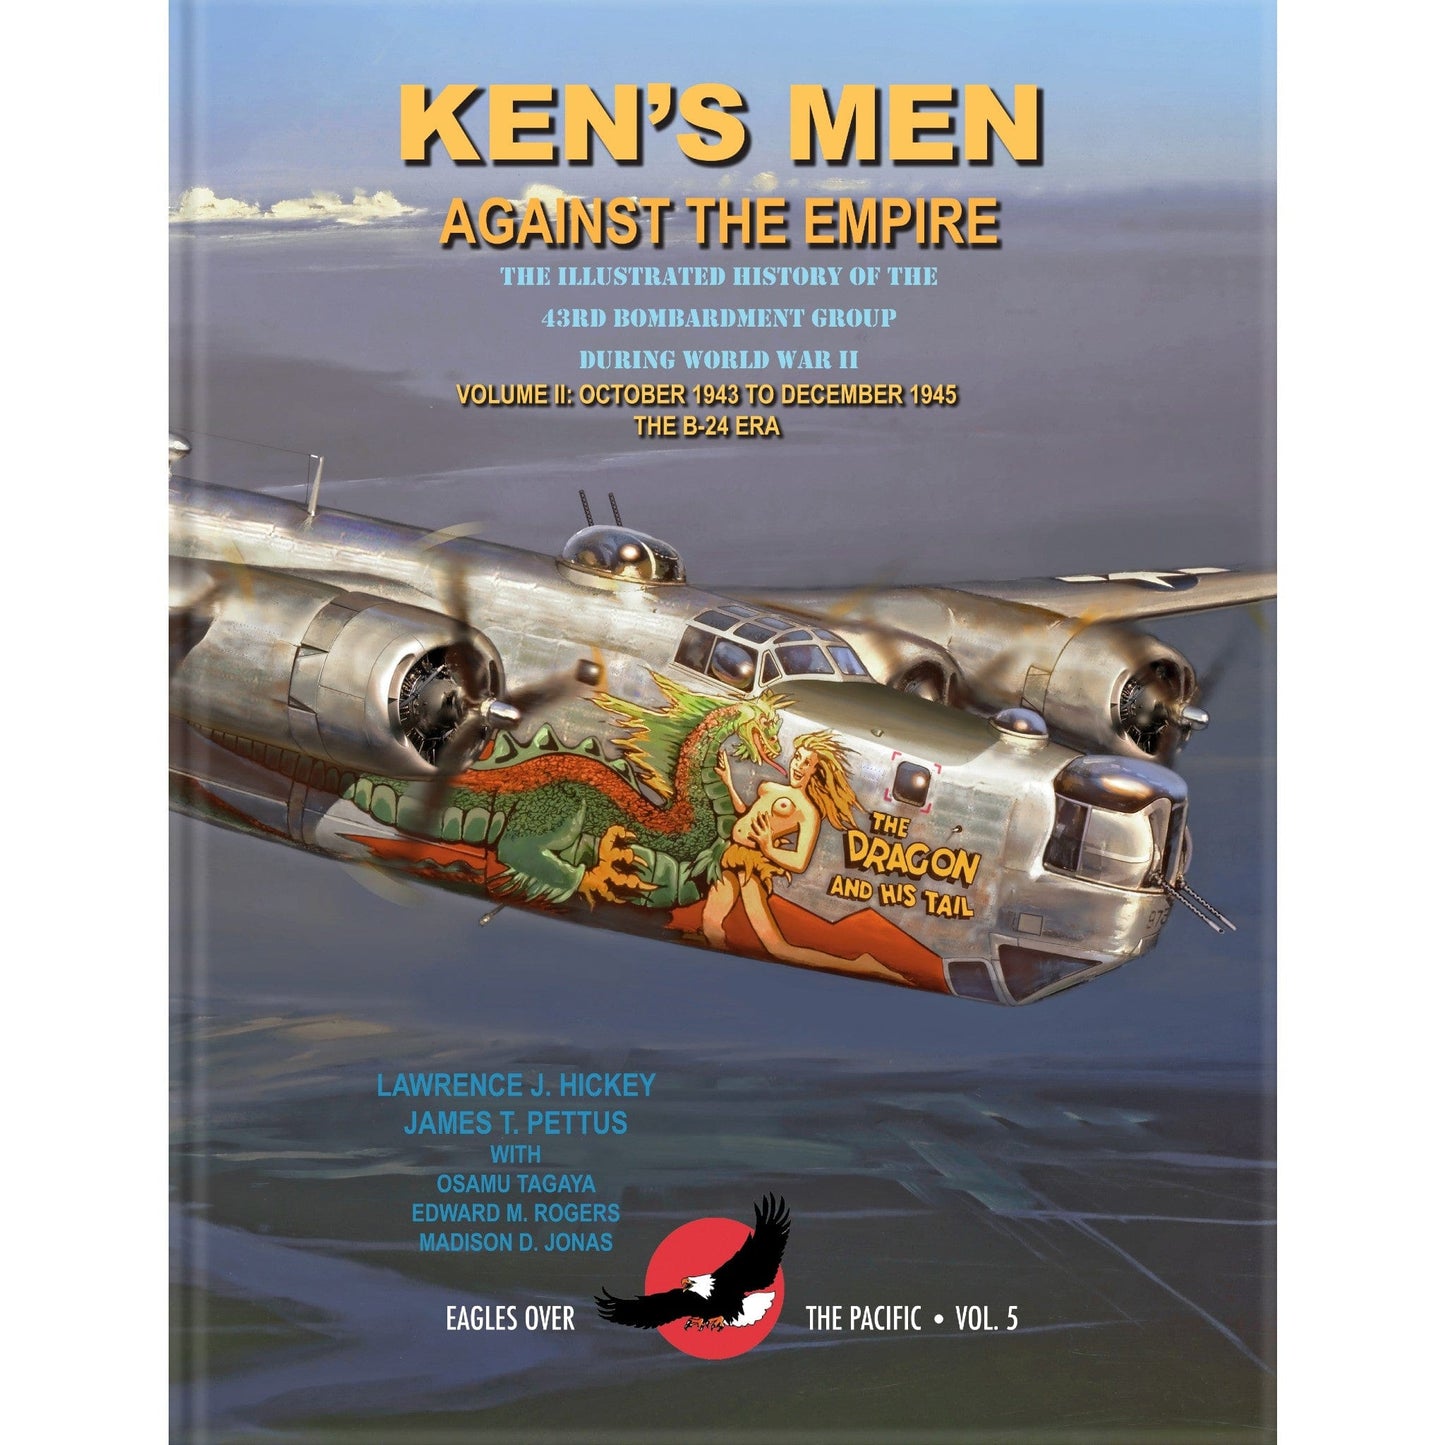 "Ken’s Men Against the Empire Vol. 2" - by author Lawrence J. Hickey from the history list store